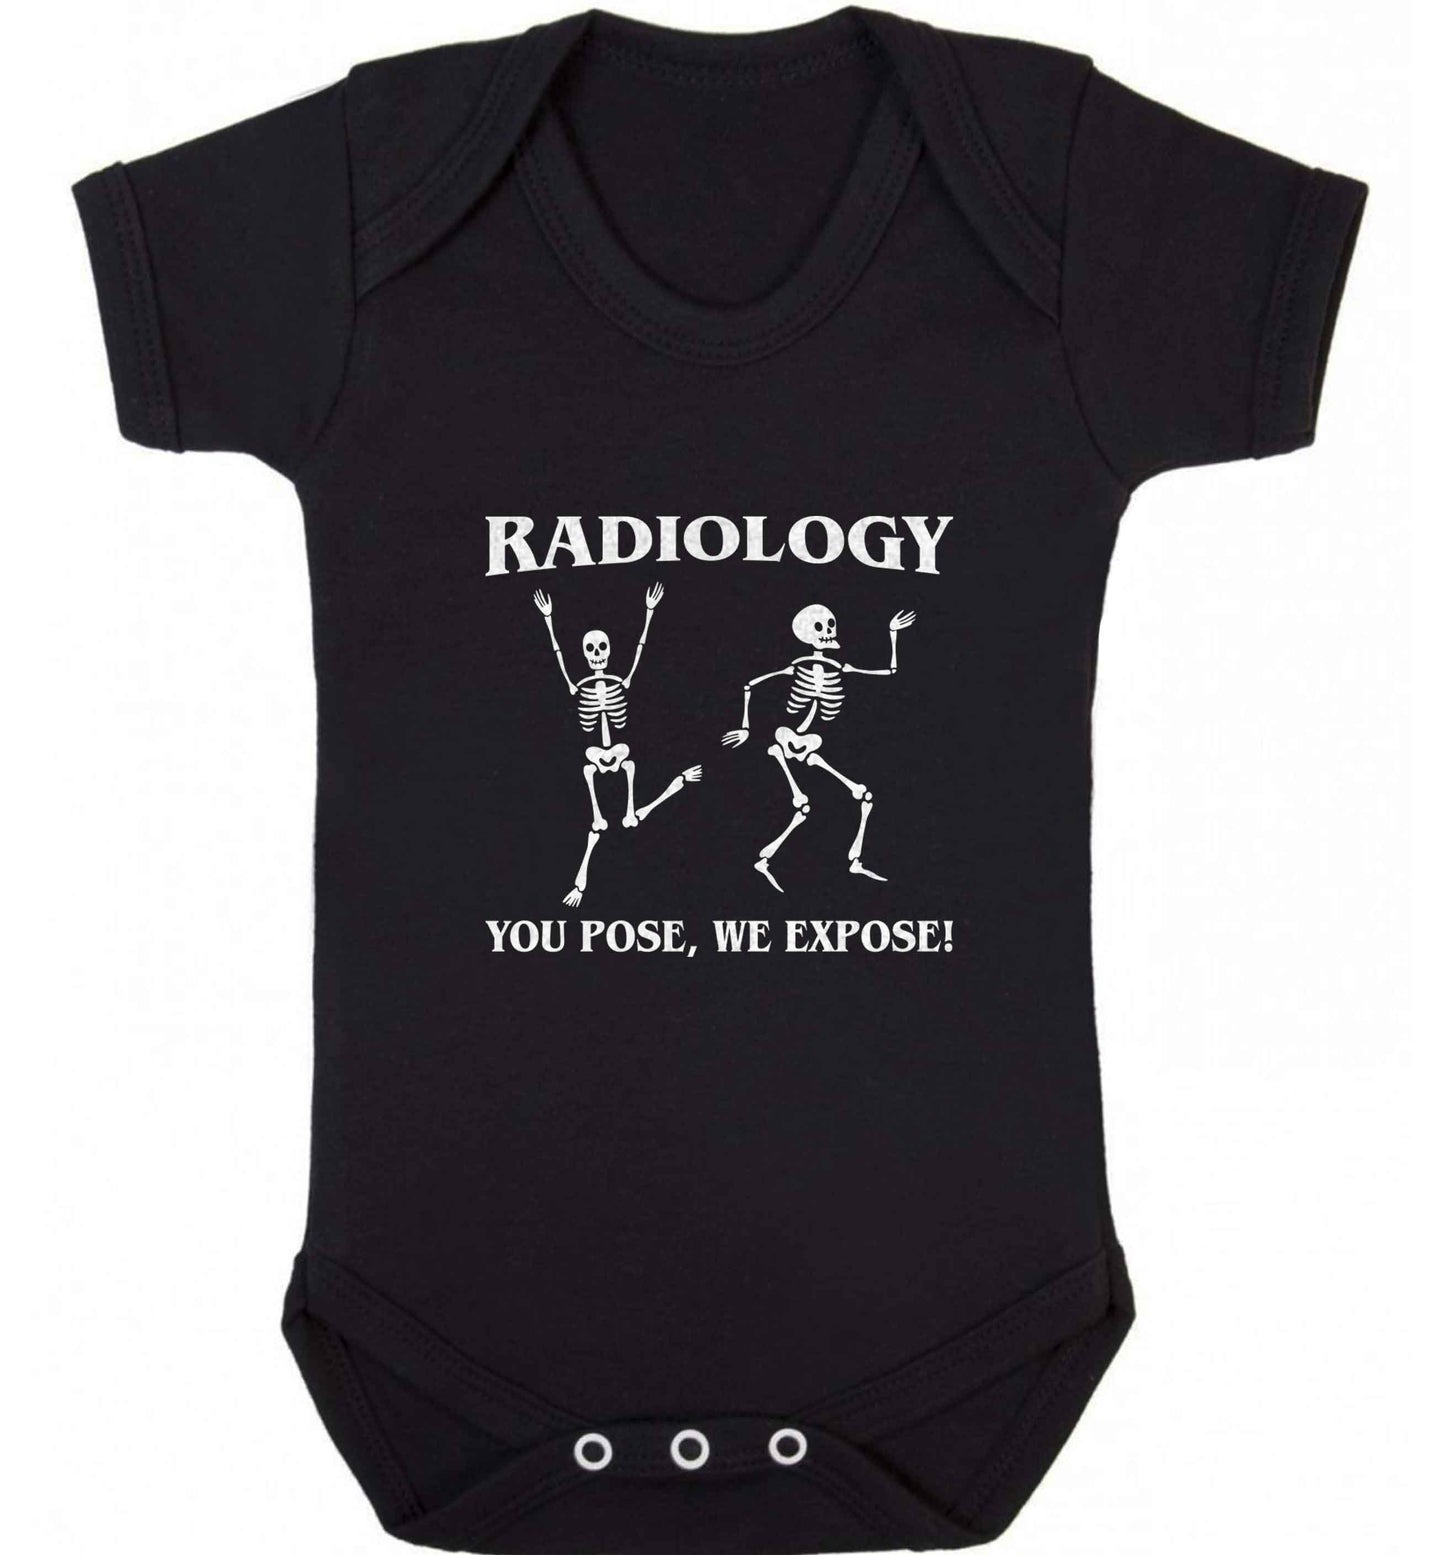 Radiology you pose we expose baby vest black 18-24 months